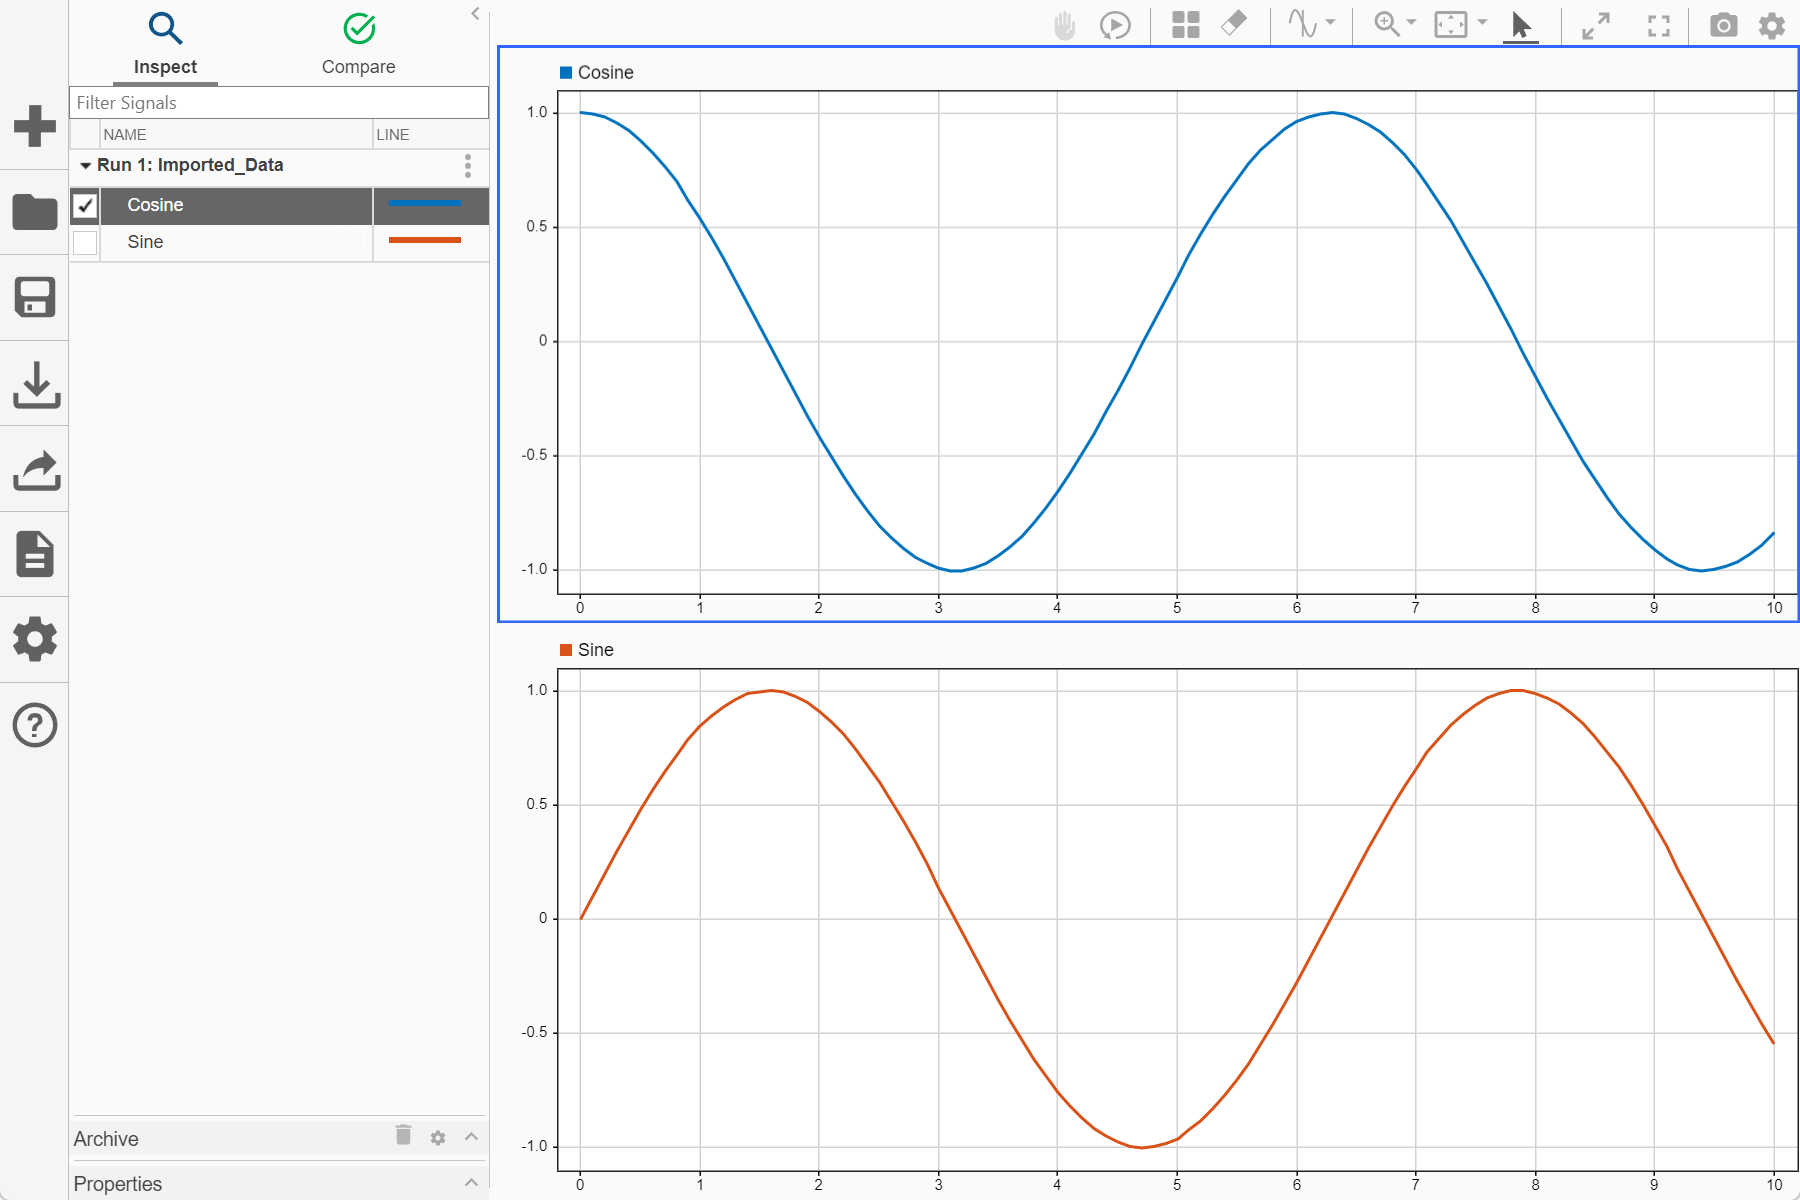 The Simulation Data Inspector with a 2x1 subplot layout. The Cosine signal is plotted in the upper subplot. The Sine signal is plotted in the lower subplot.